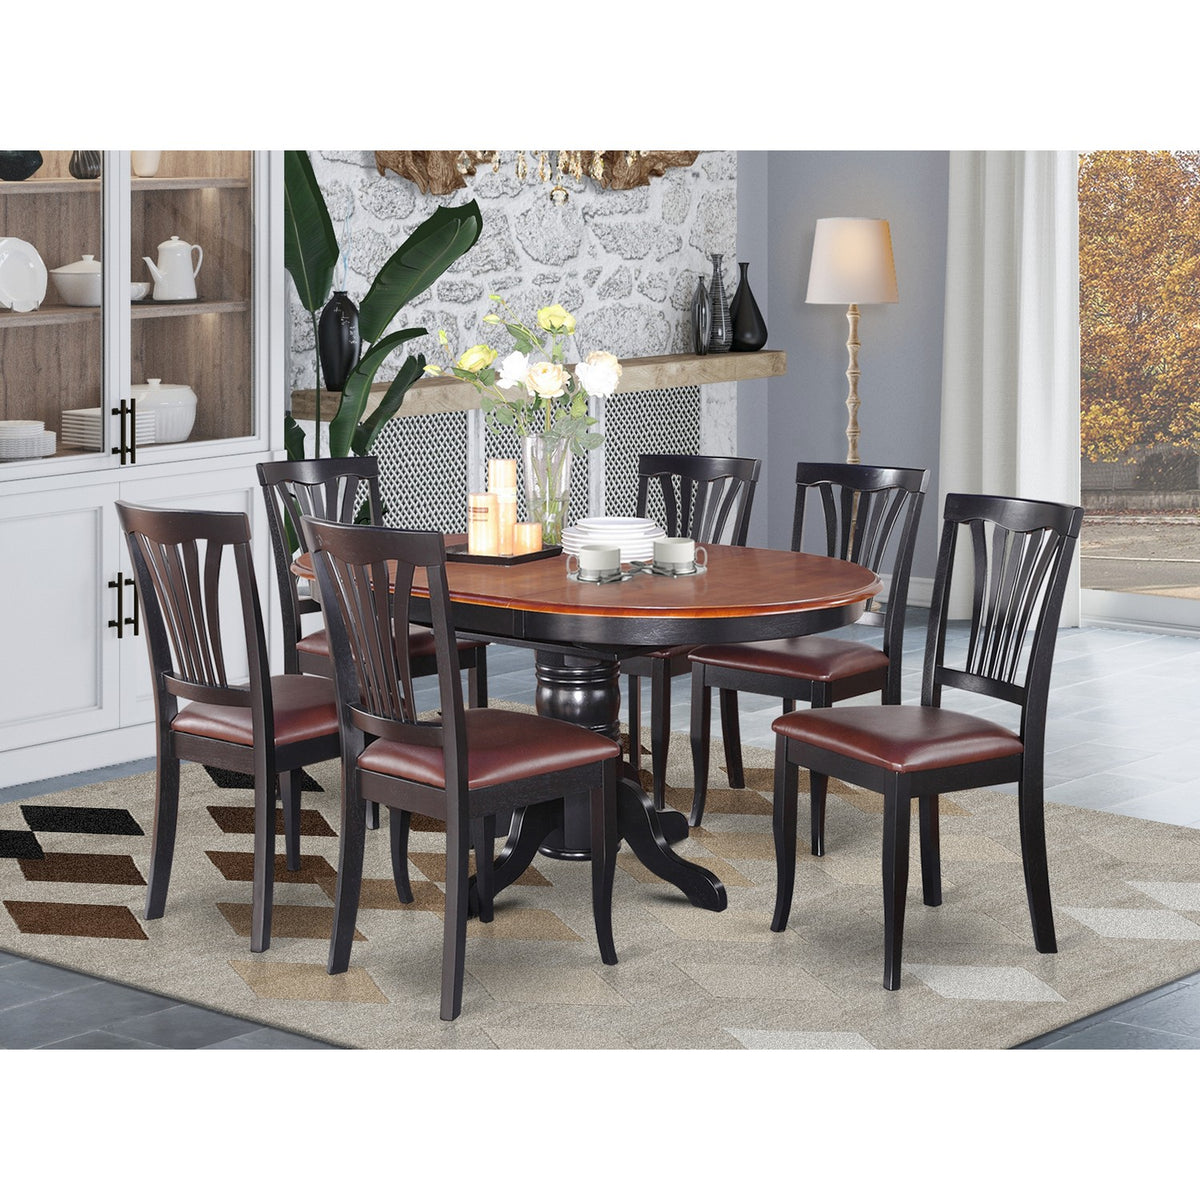 East West Furniture F3MZ7-N04 7 Piece Modern Dining Table Set Consist –  East West Furniture Main Site